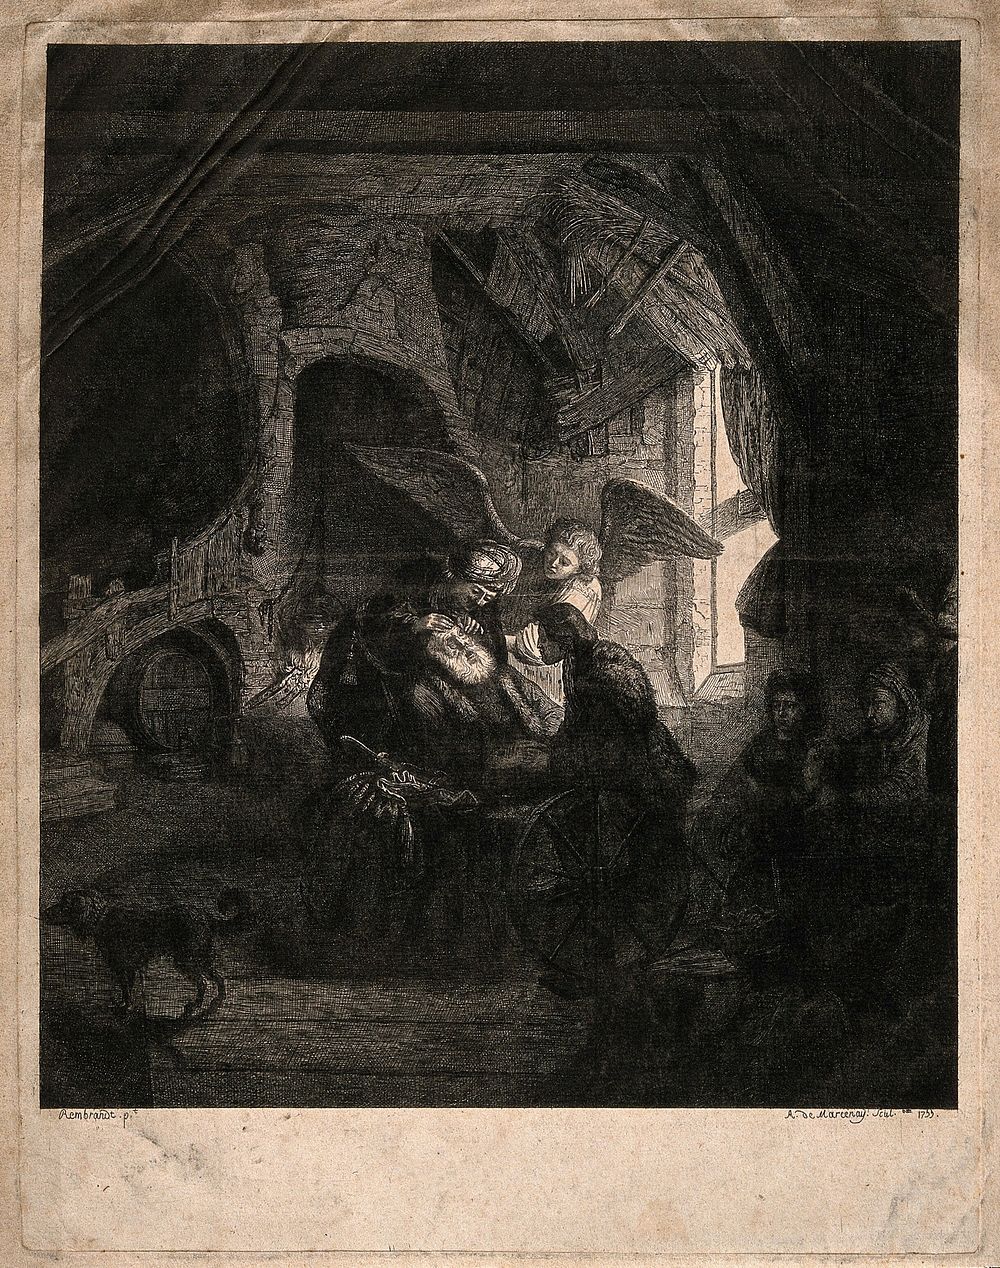 Tobias under the guidance of the archangel Raphael, cures Tobit's blindness using a 'fish-gall'. Etching by A. de Marcenay…